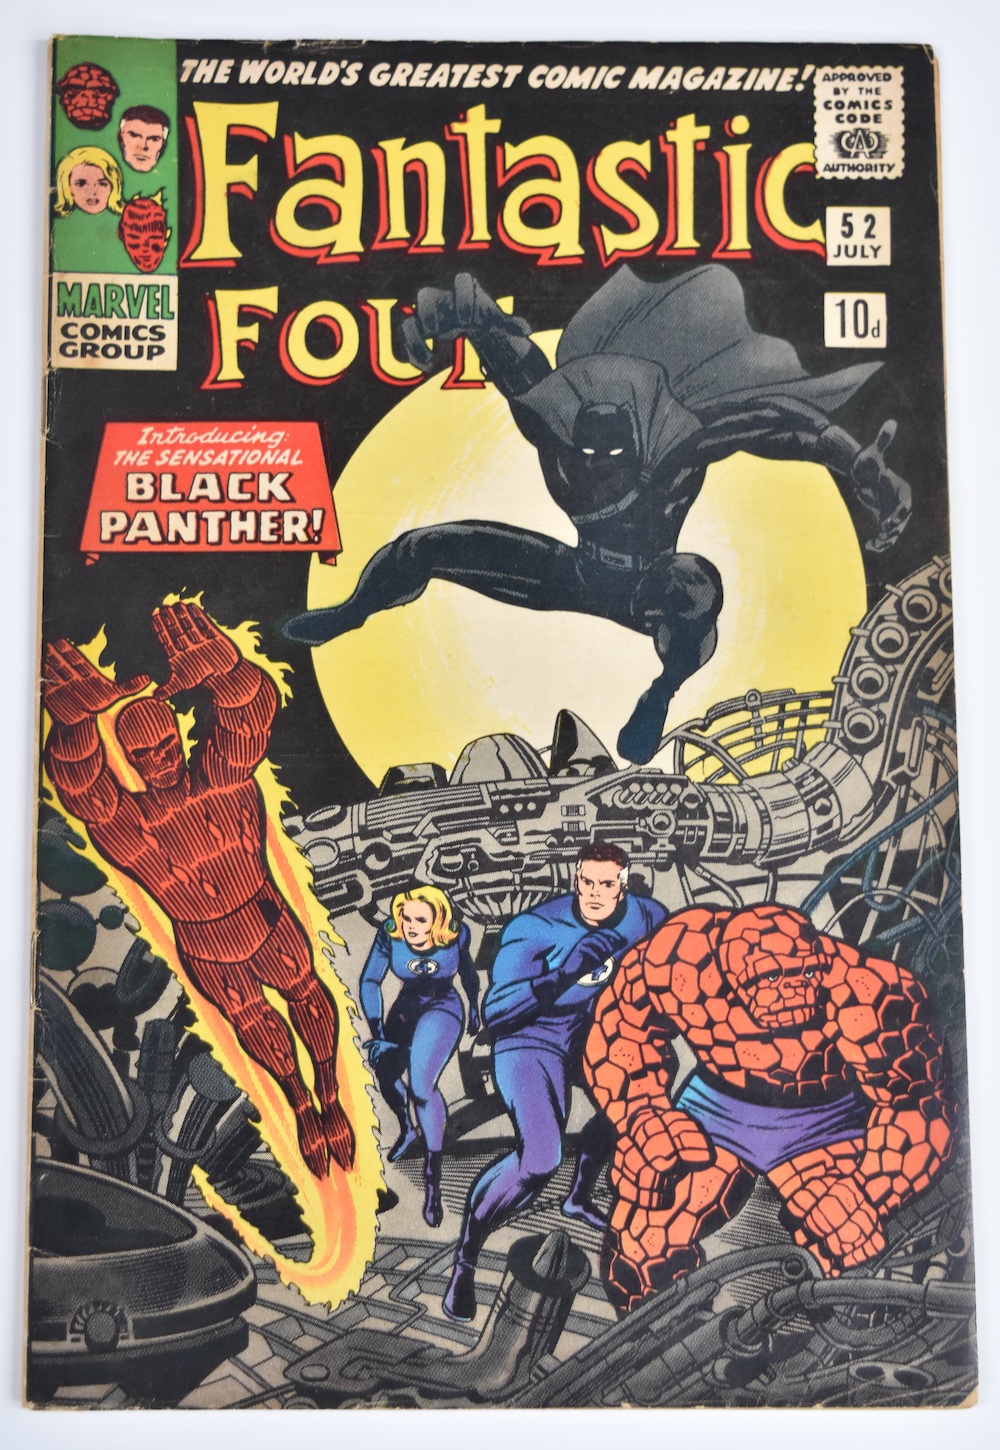 Fantastic Four Issue #52 By Marvel Comics, First Appearance Of Black Panther. HAMMER Ś360